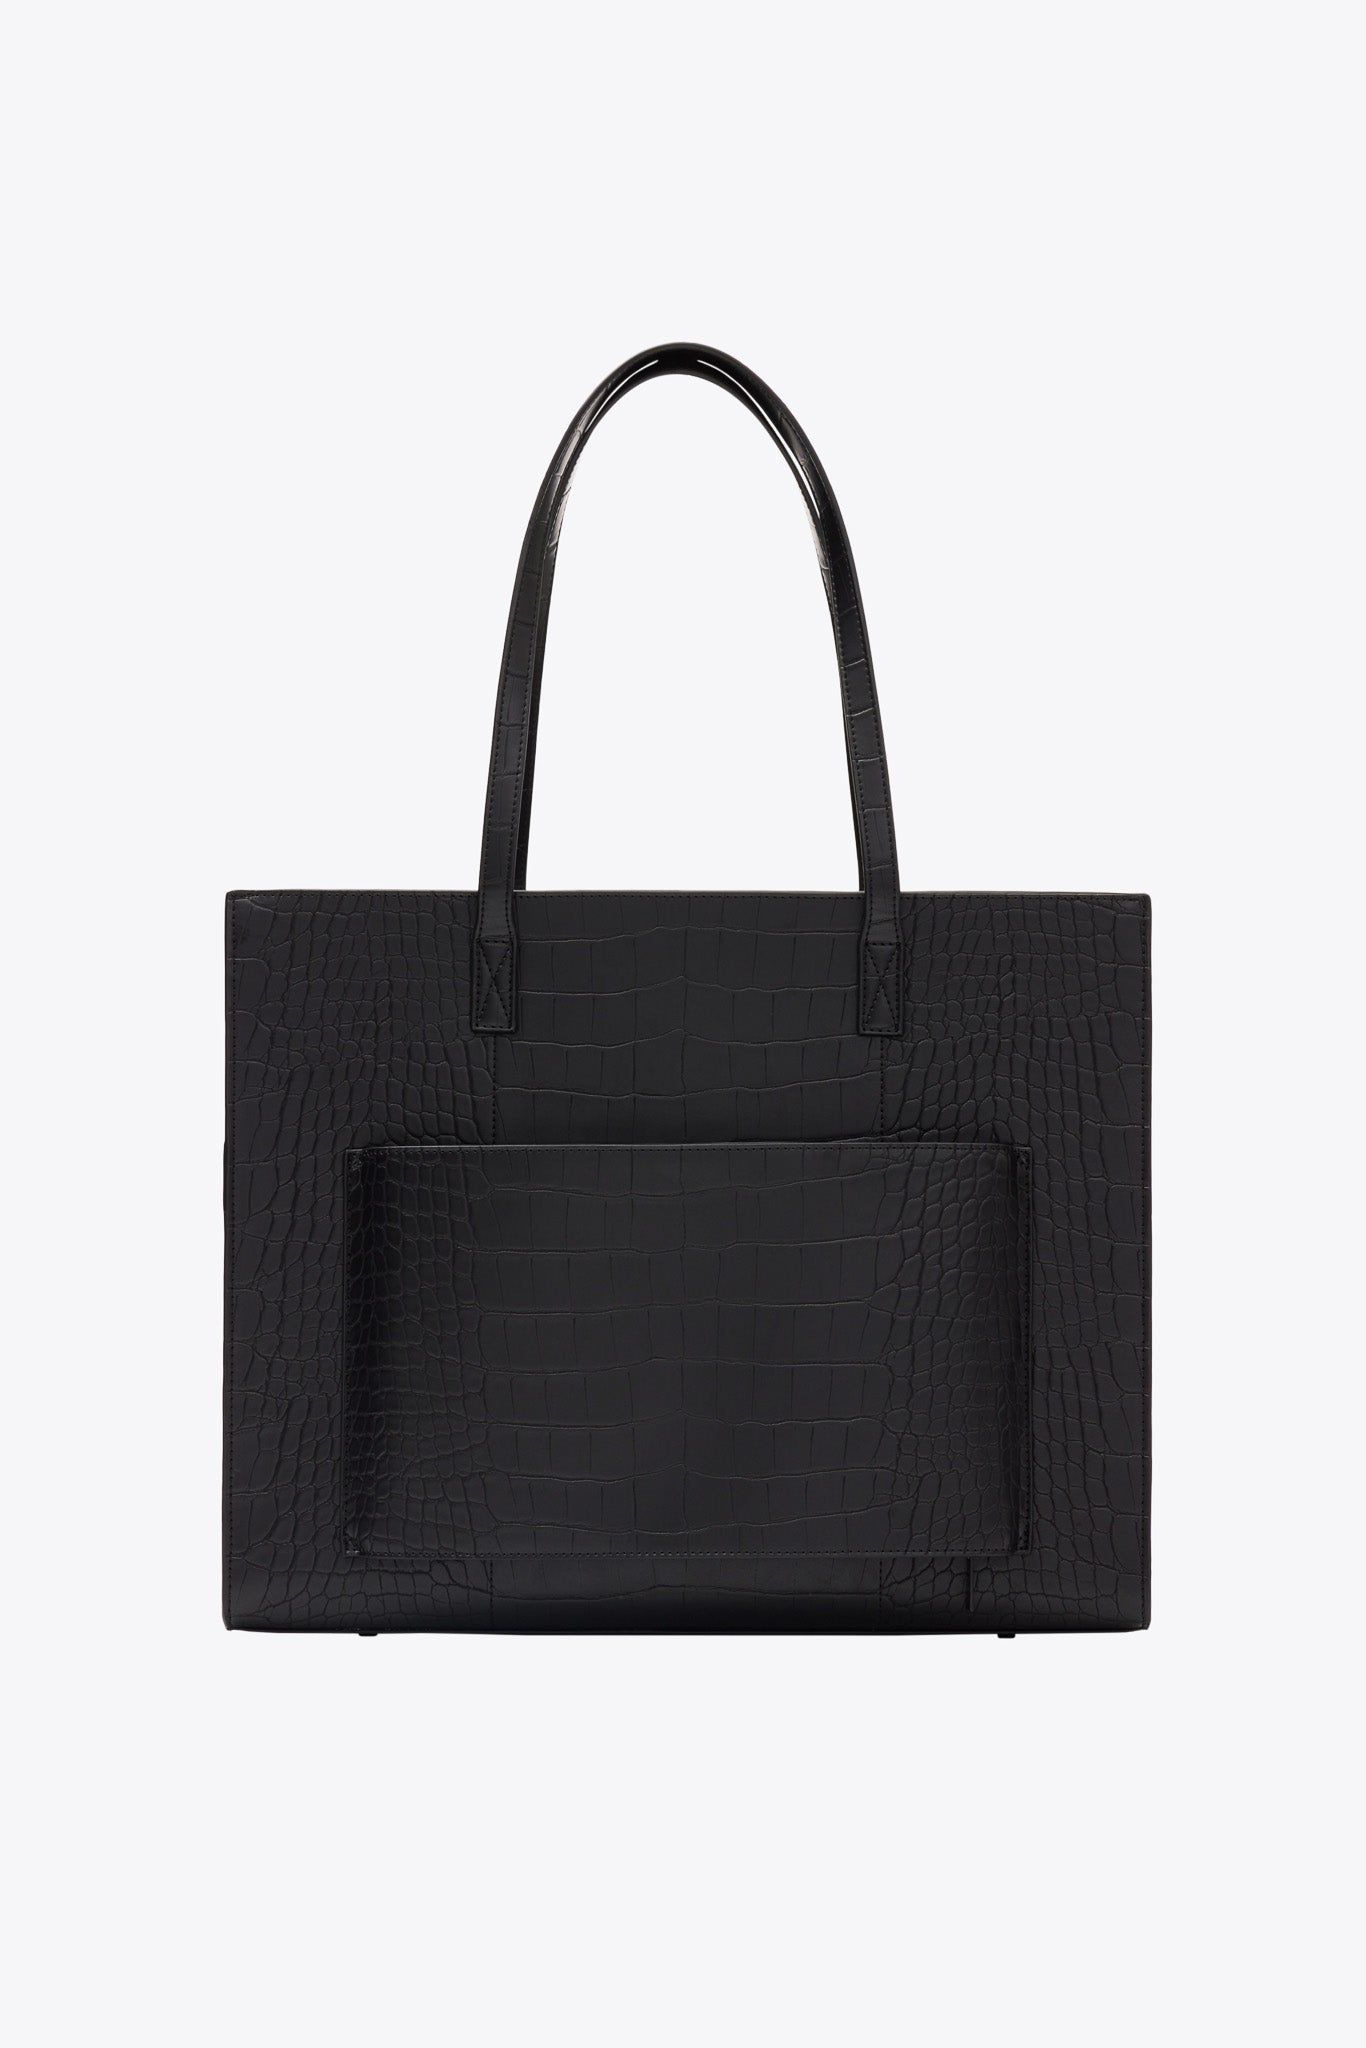 The Large Work Tote in Black Croc